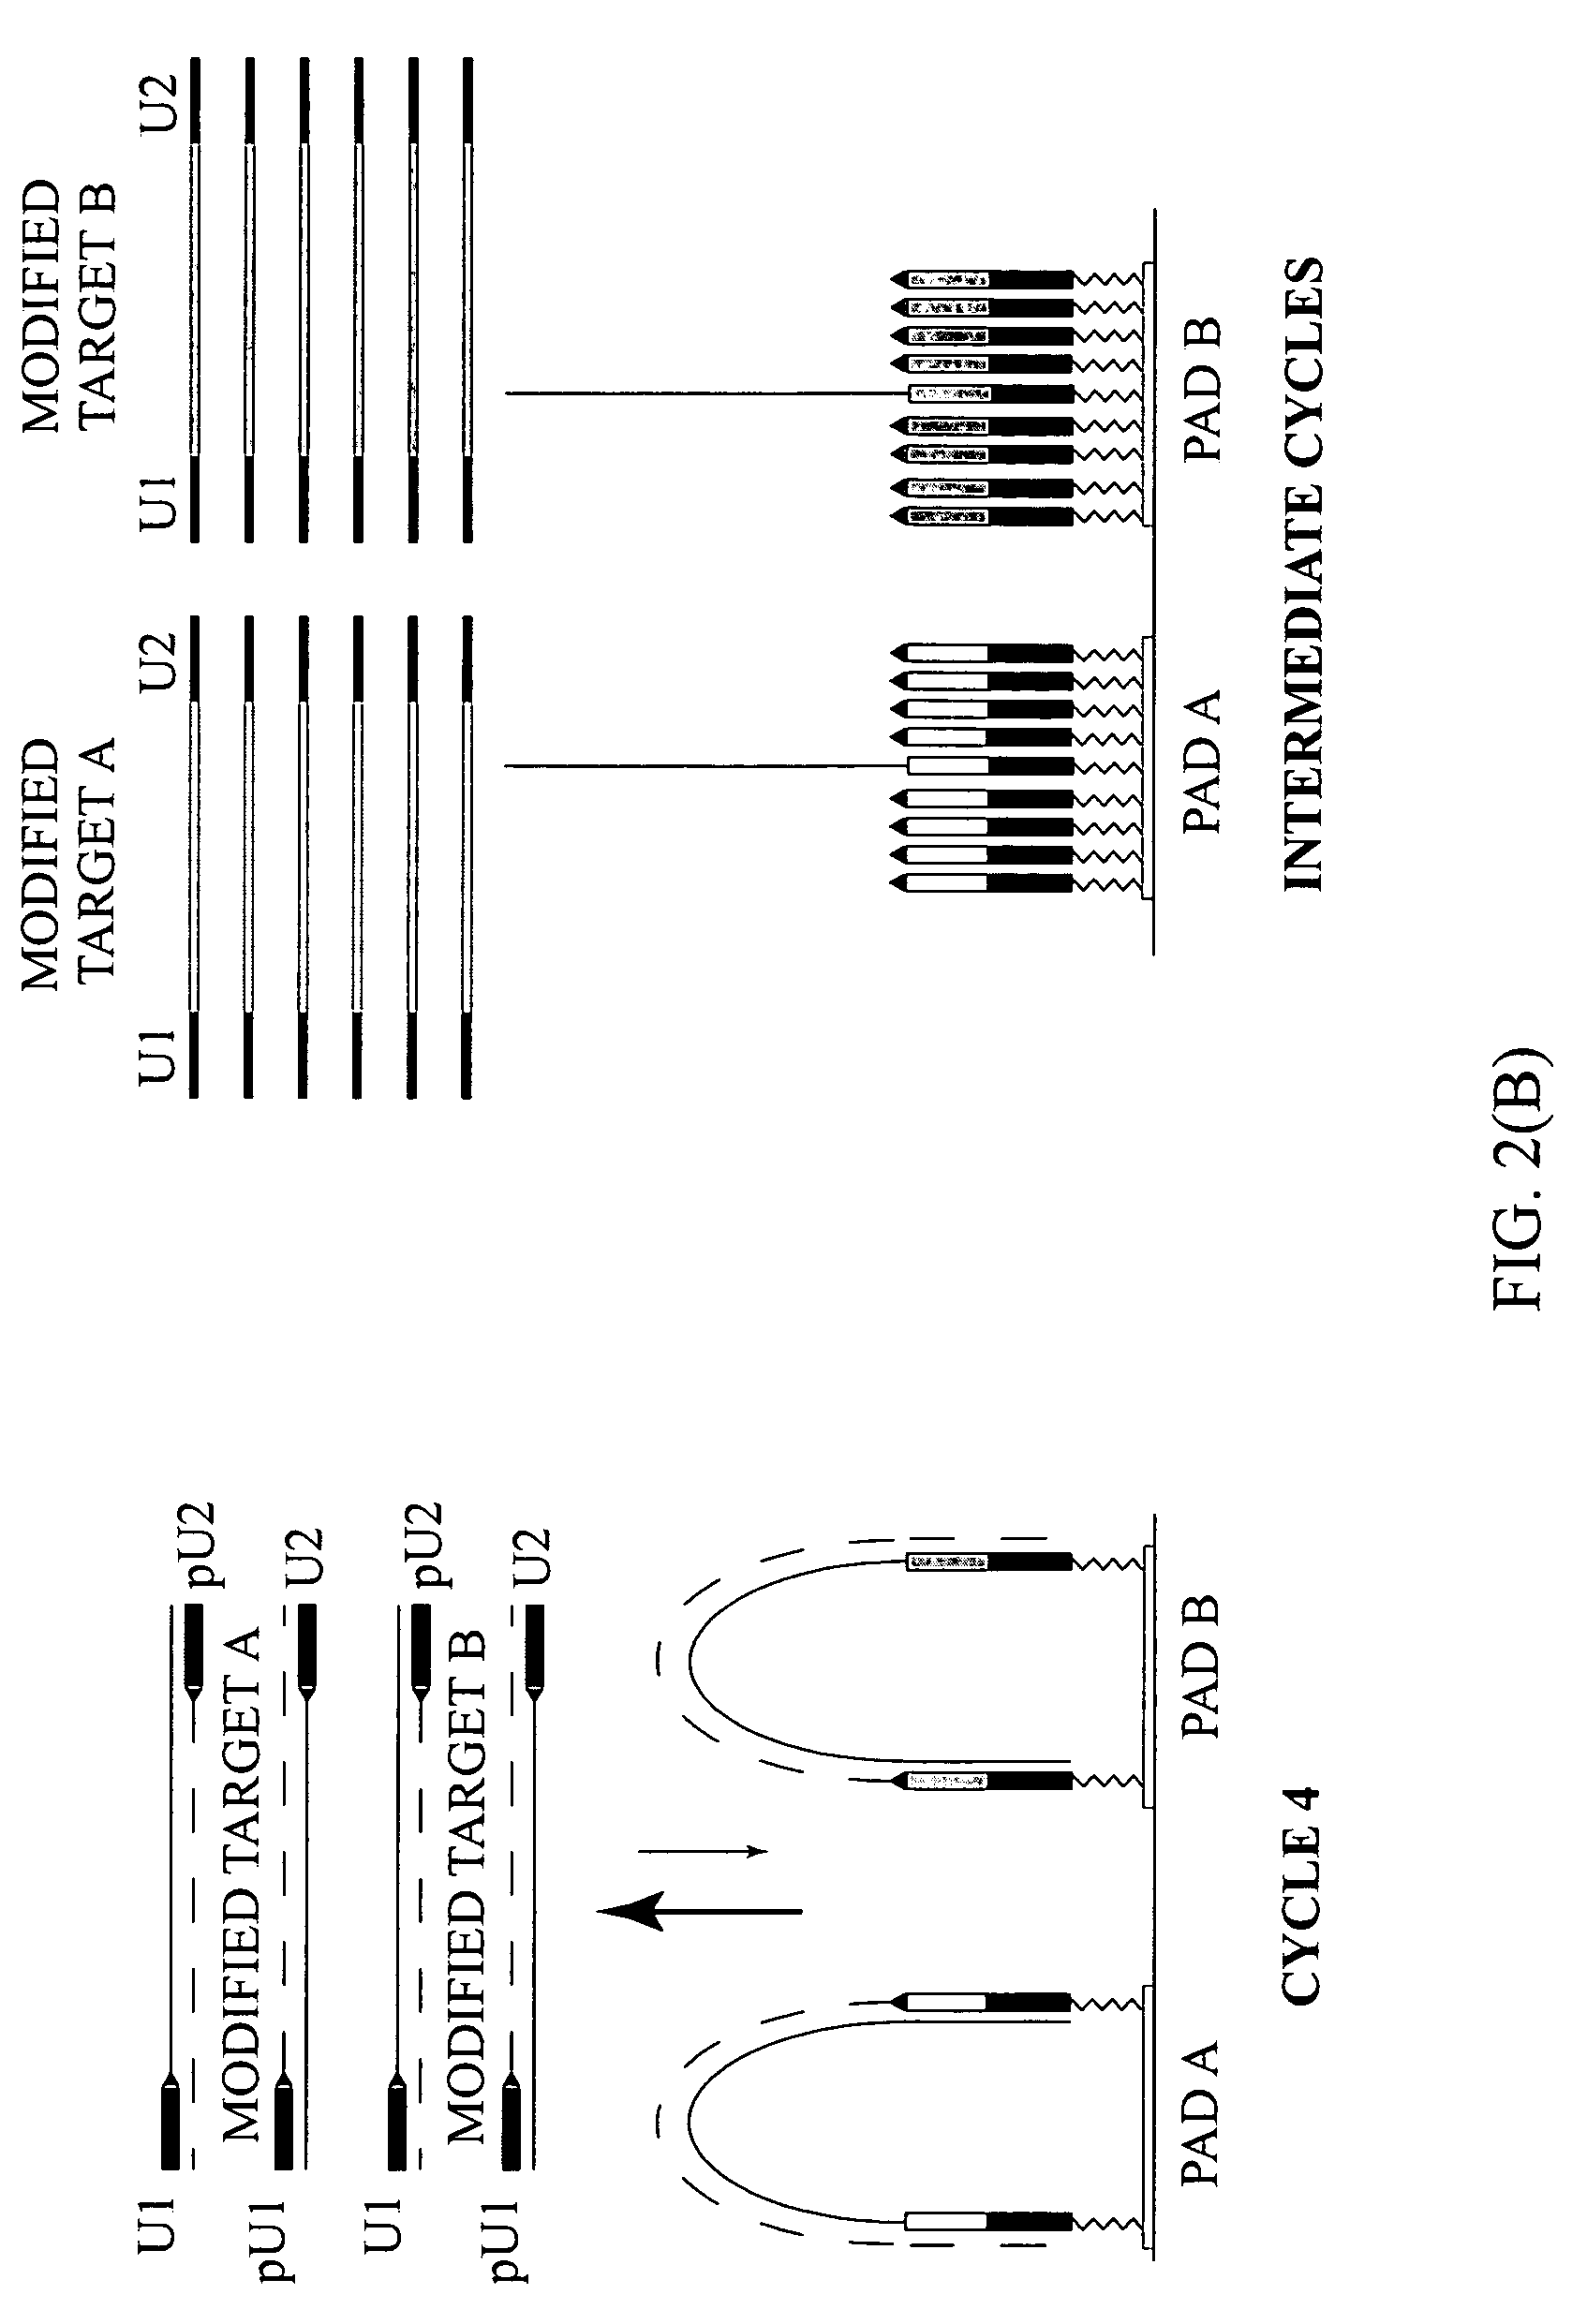 Dual phase multiplex polymerase chain reaction